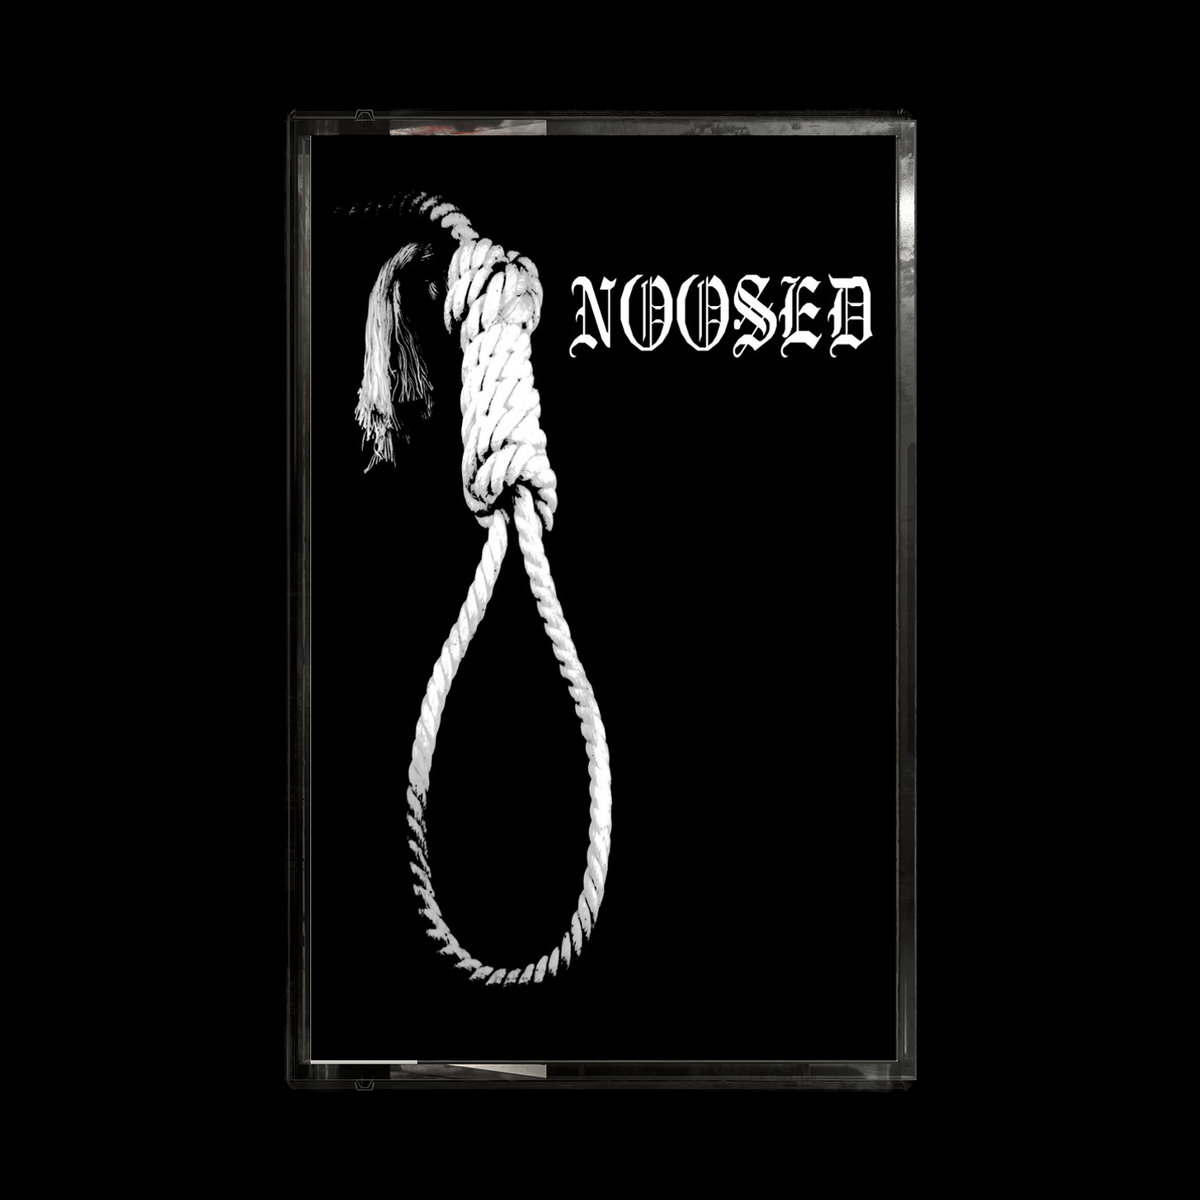 NOOSED - Noosed cover 